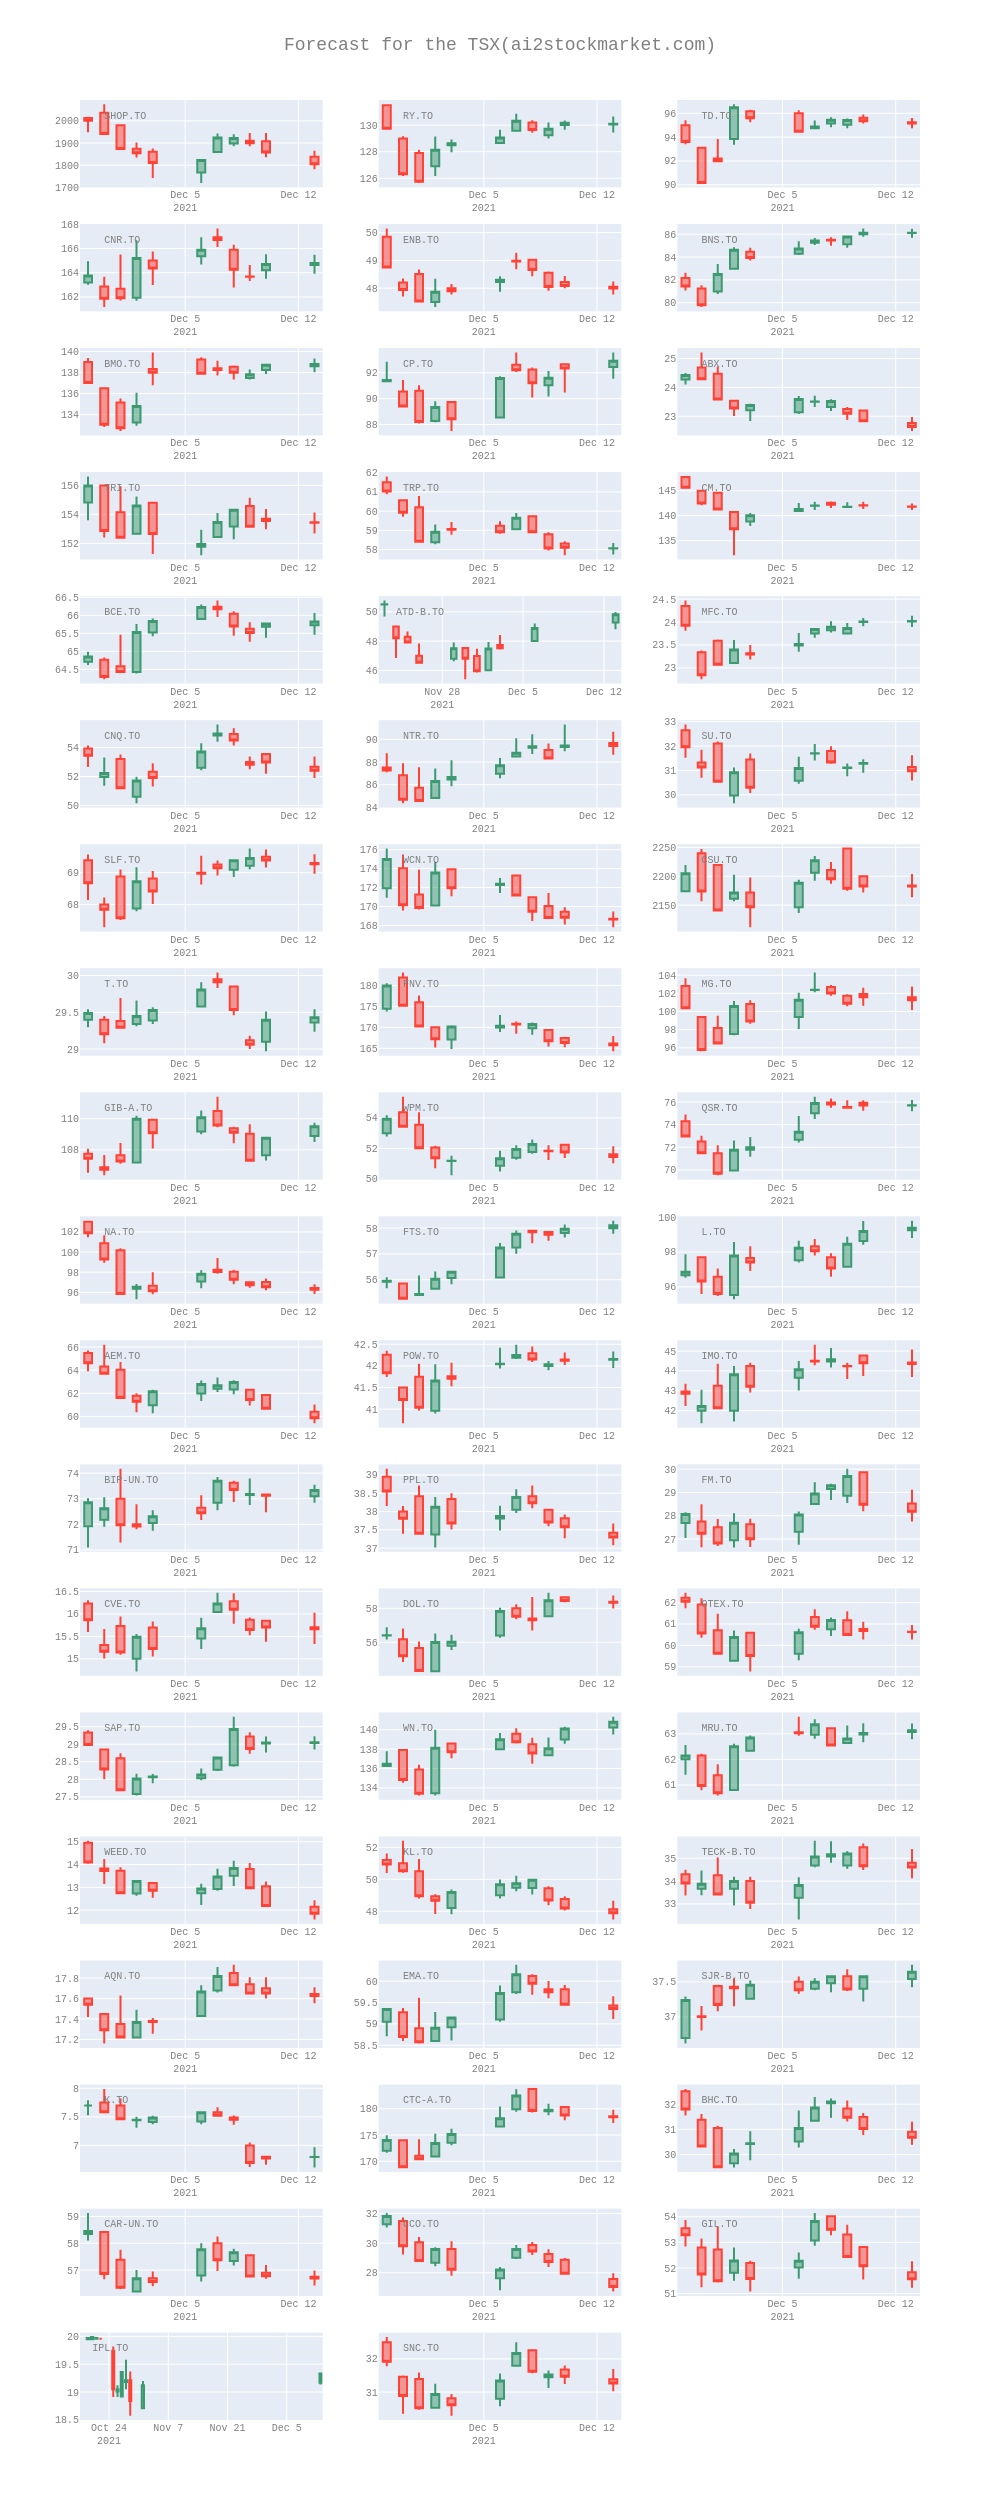 Forecast for the TSX(ai2stockmarket.com) | candlestick made by Ziwang | plotly